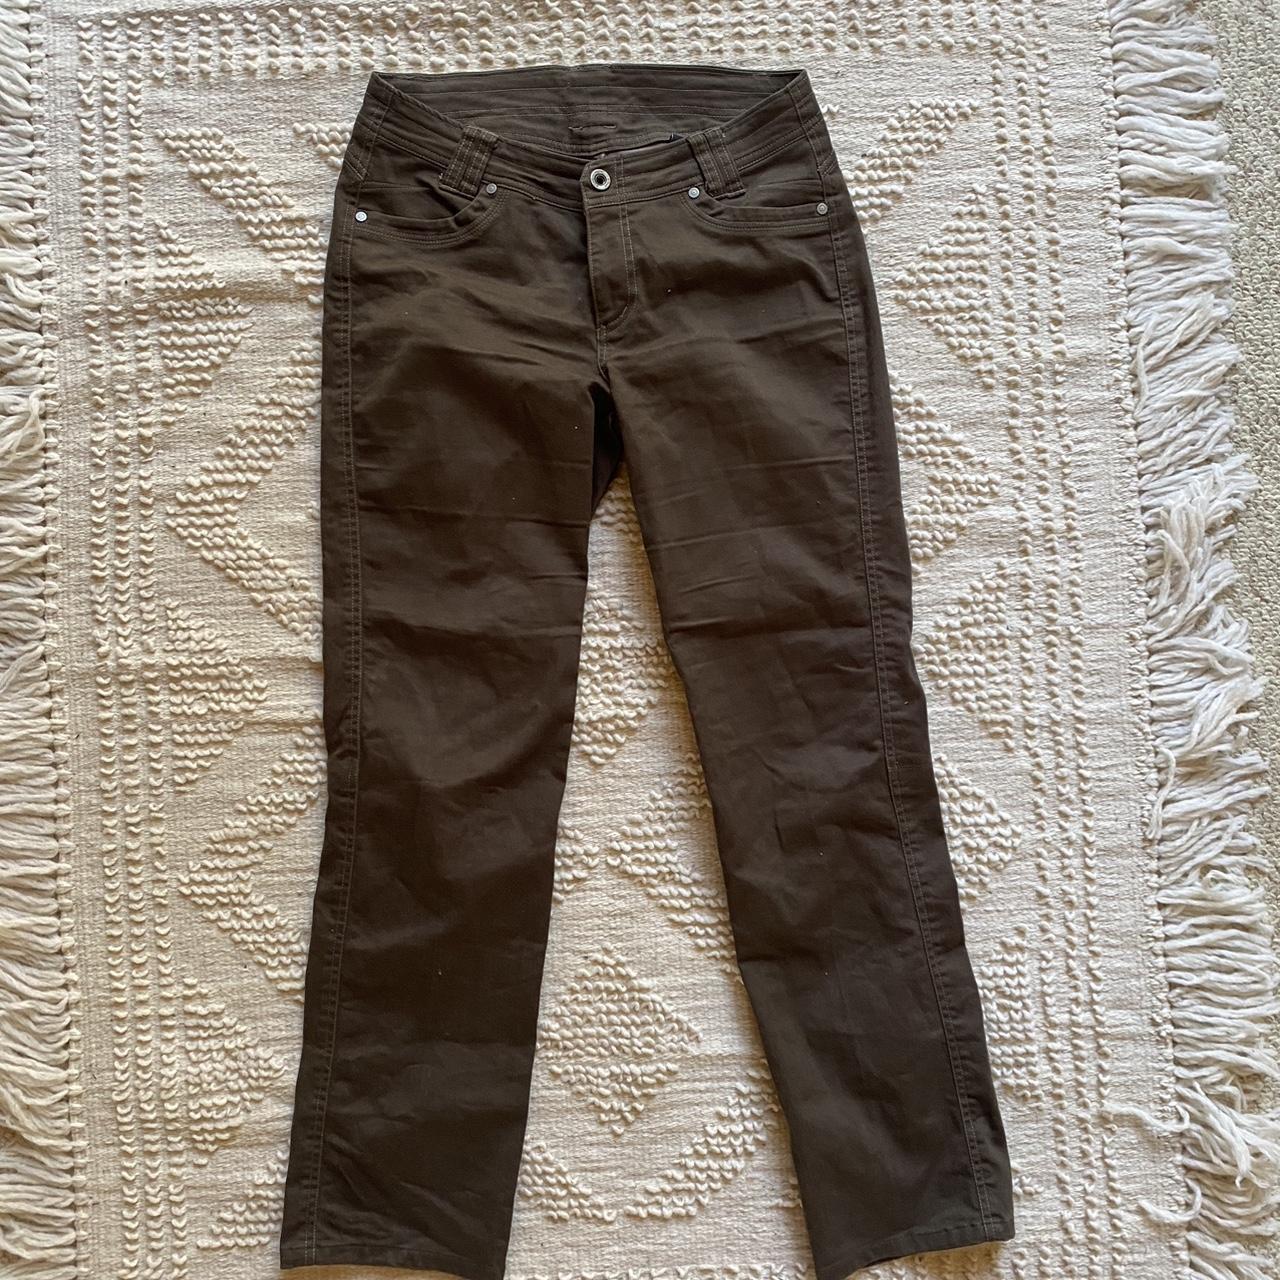 Kuhl women's pants Stretchy and durable material- - Depop